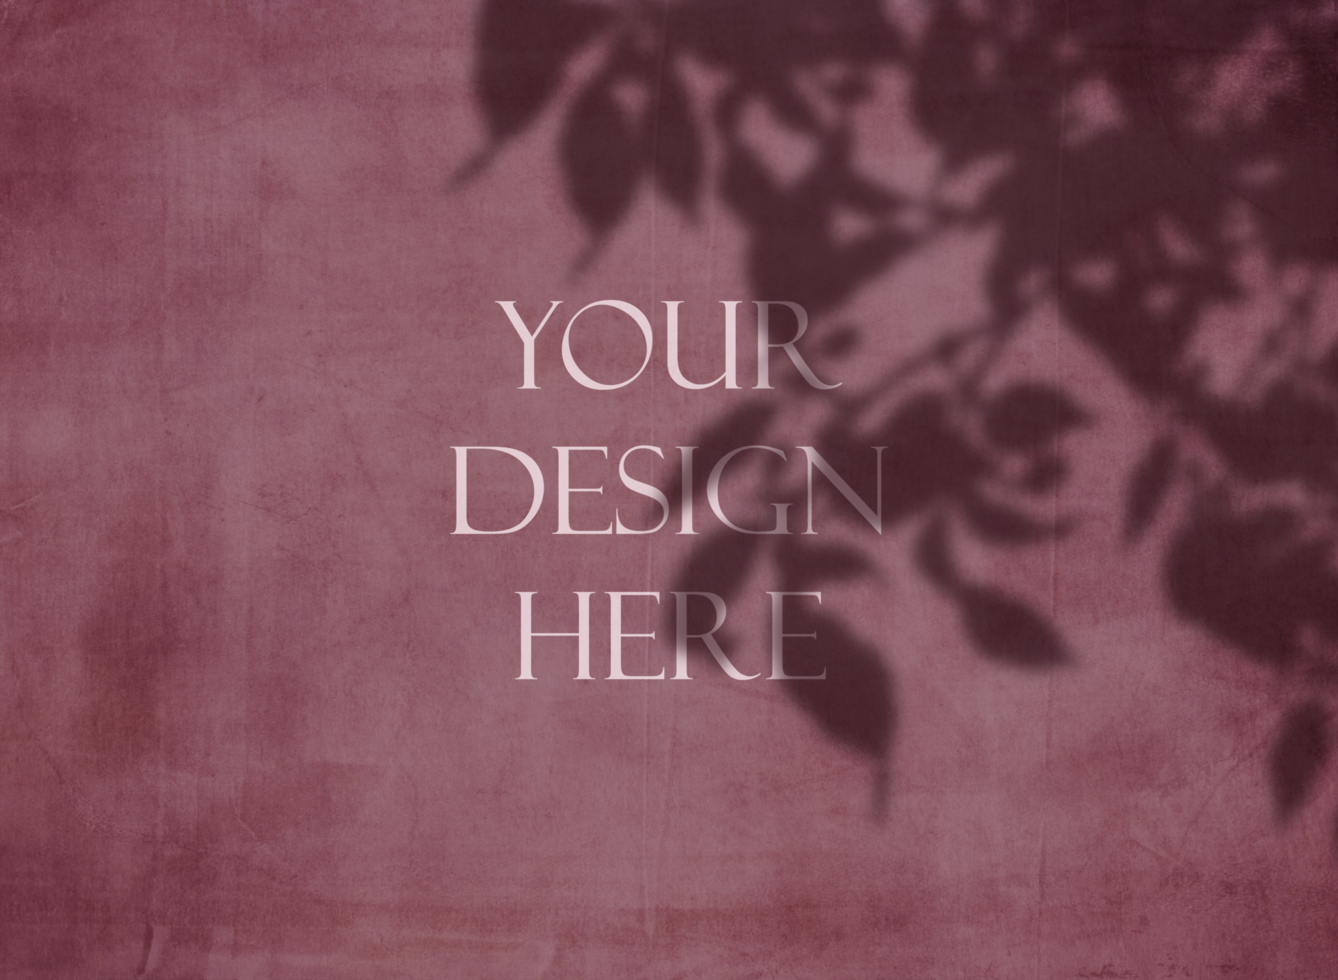 Editable grunge mock up with floral shadow overlay psd